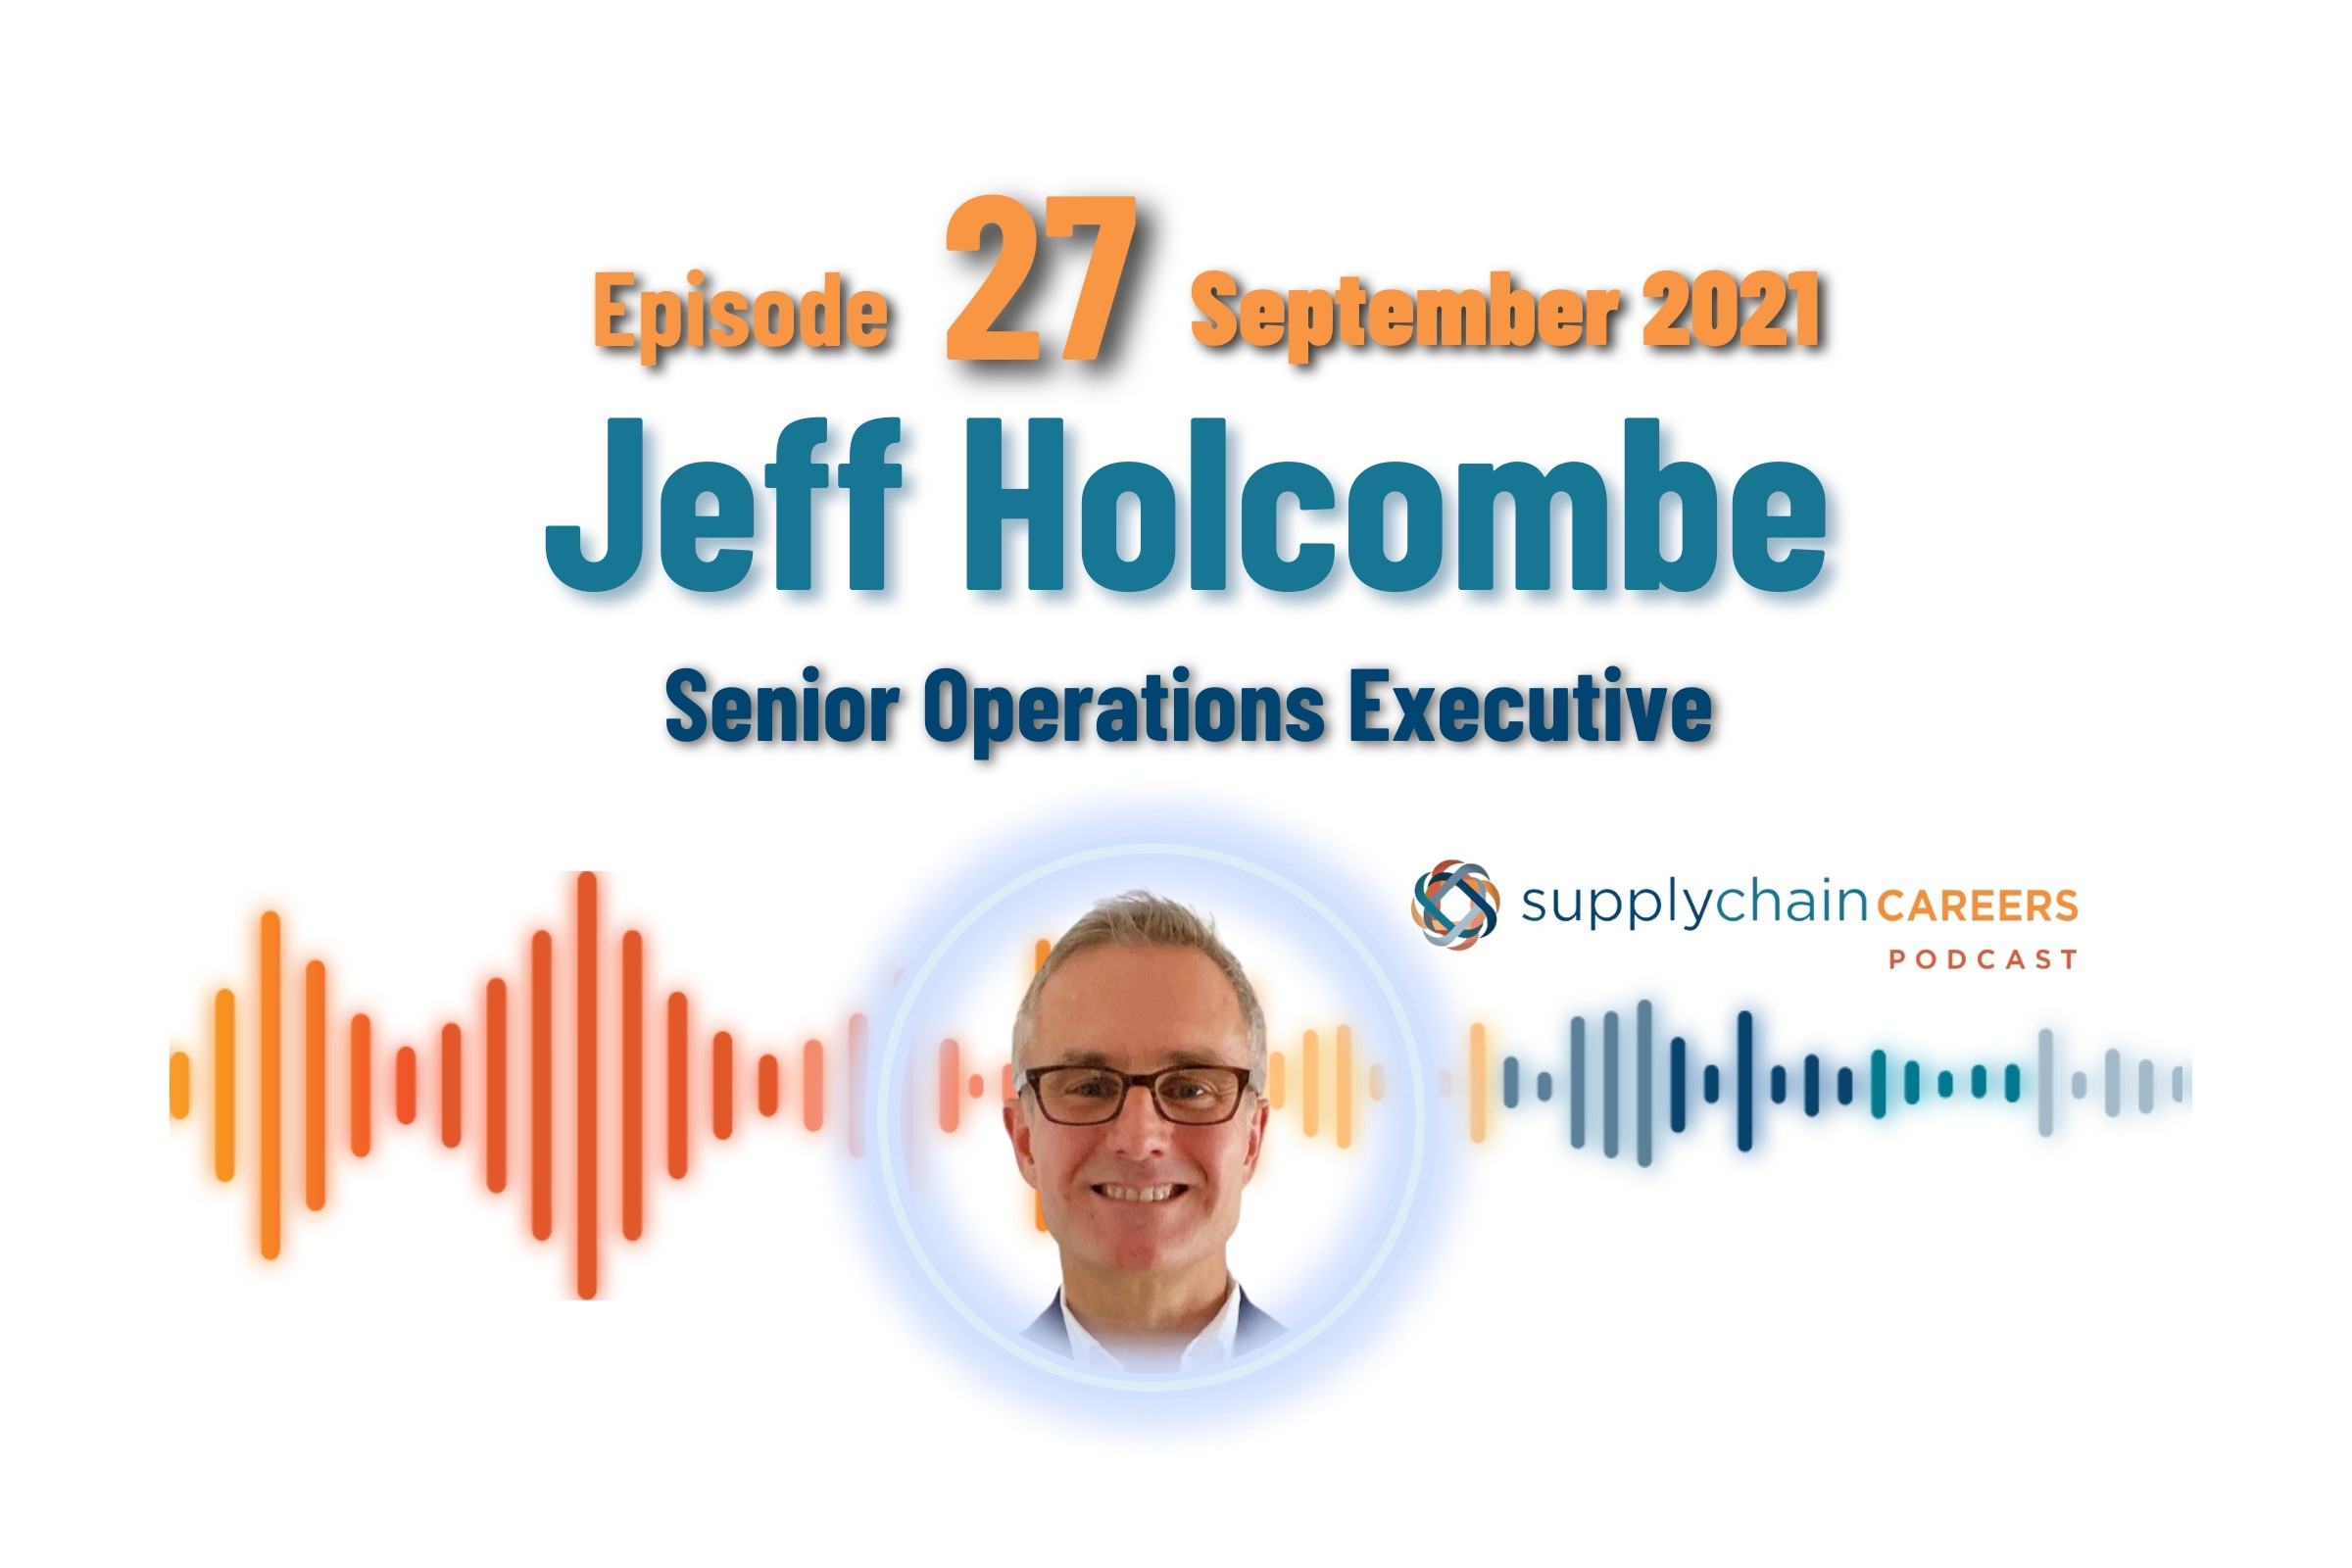 jeff-holcombe-supply-chain-careers-podcast